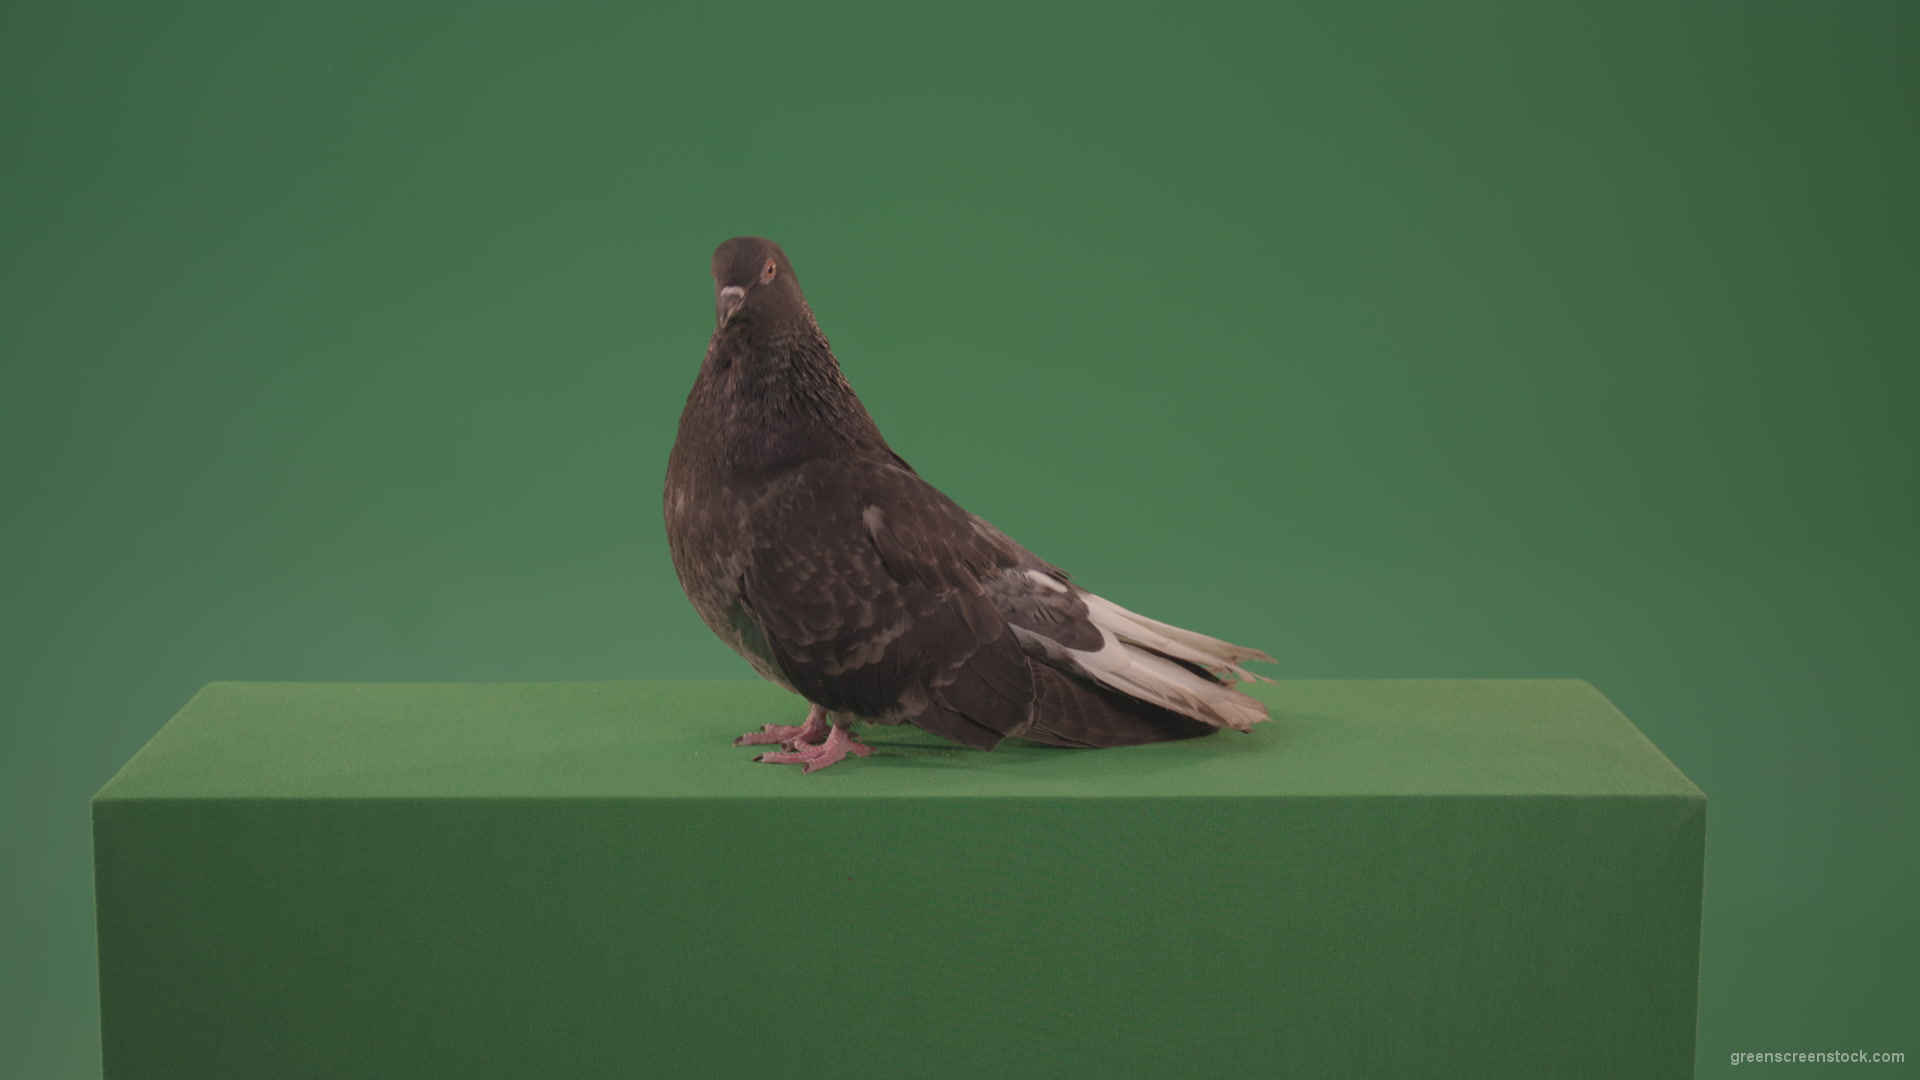 Pigeon-flies-over-the-city-in-search-of-its-nest-isolated-on-green-screen_001 Green Screen Stock